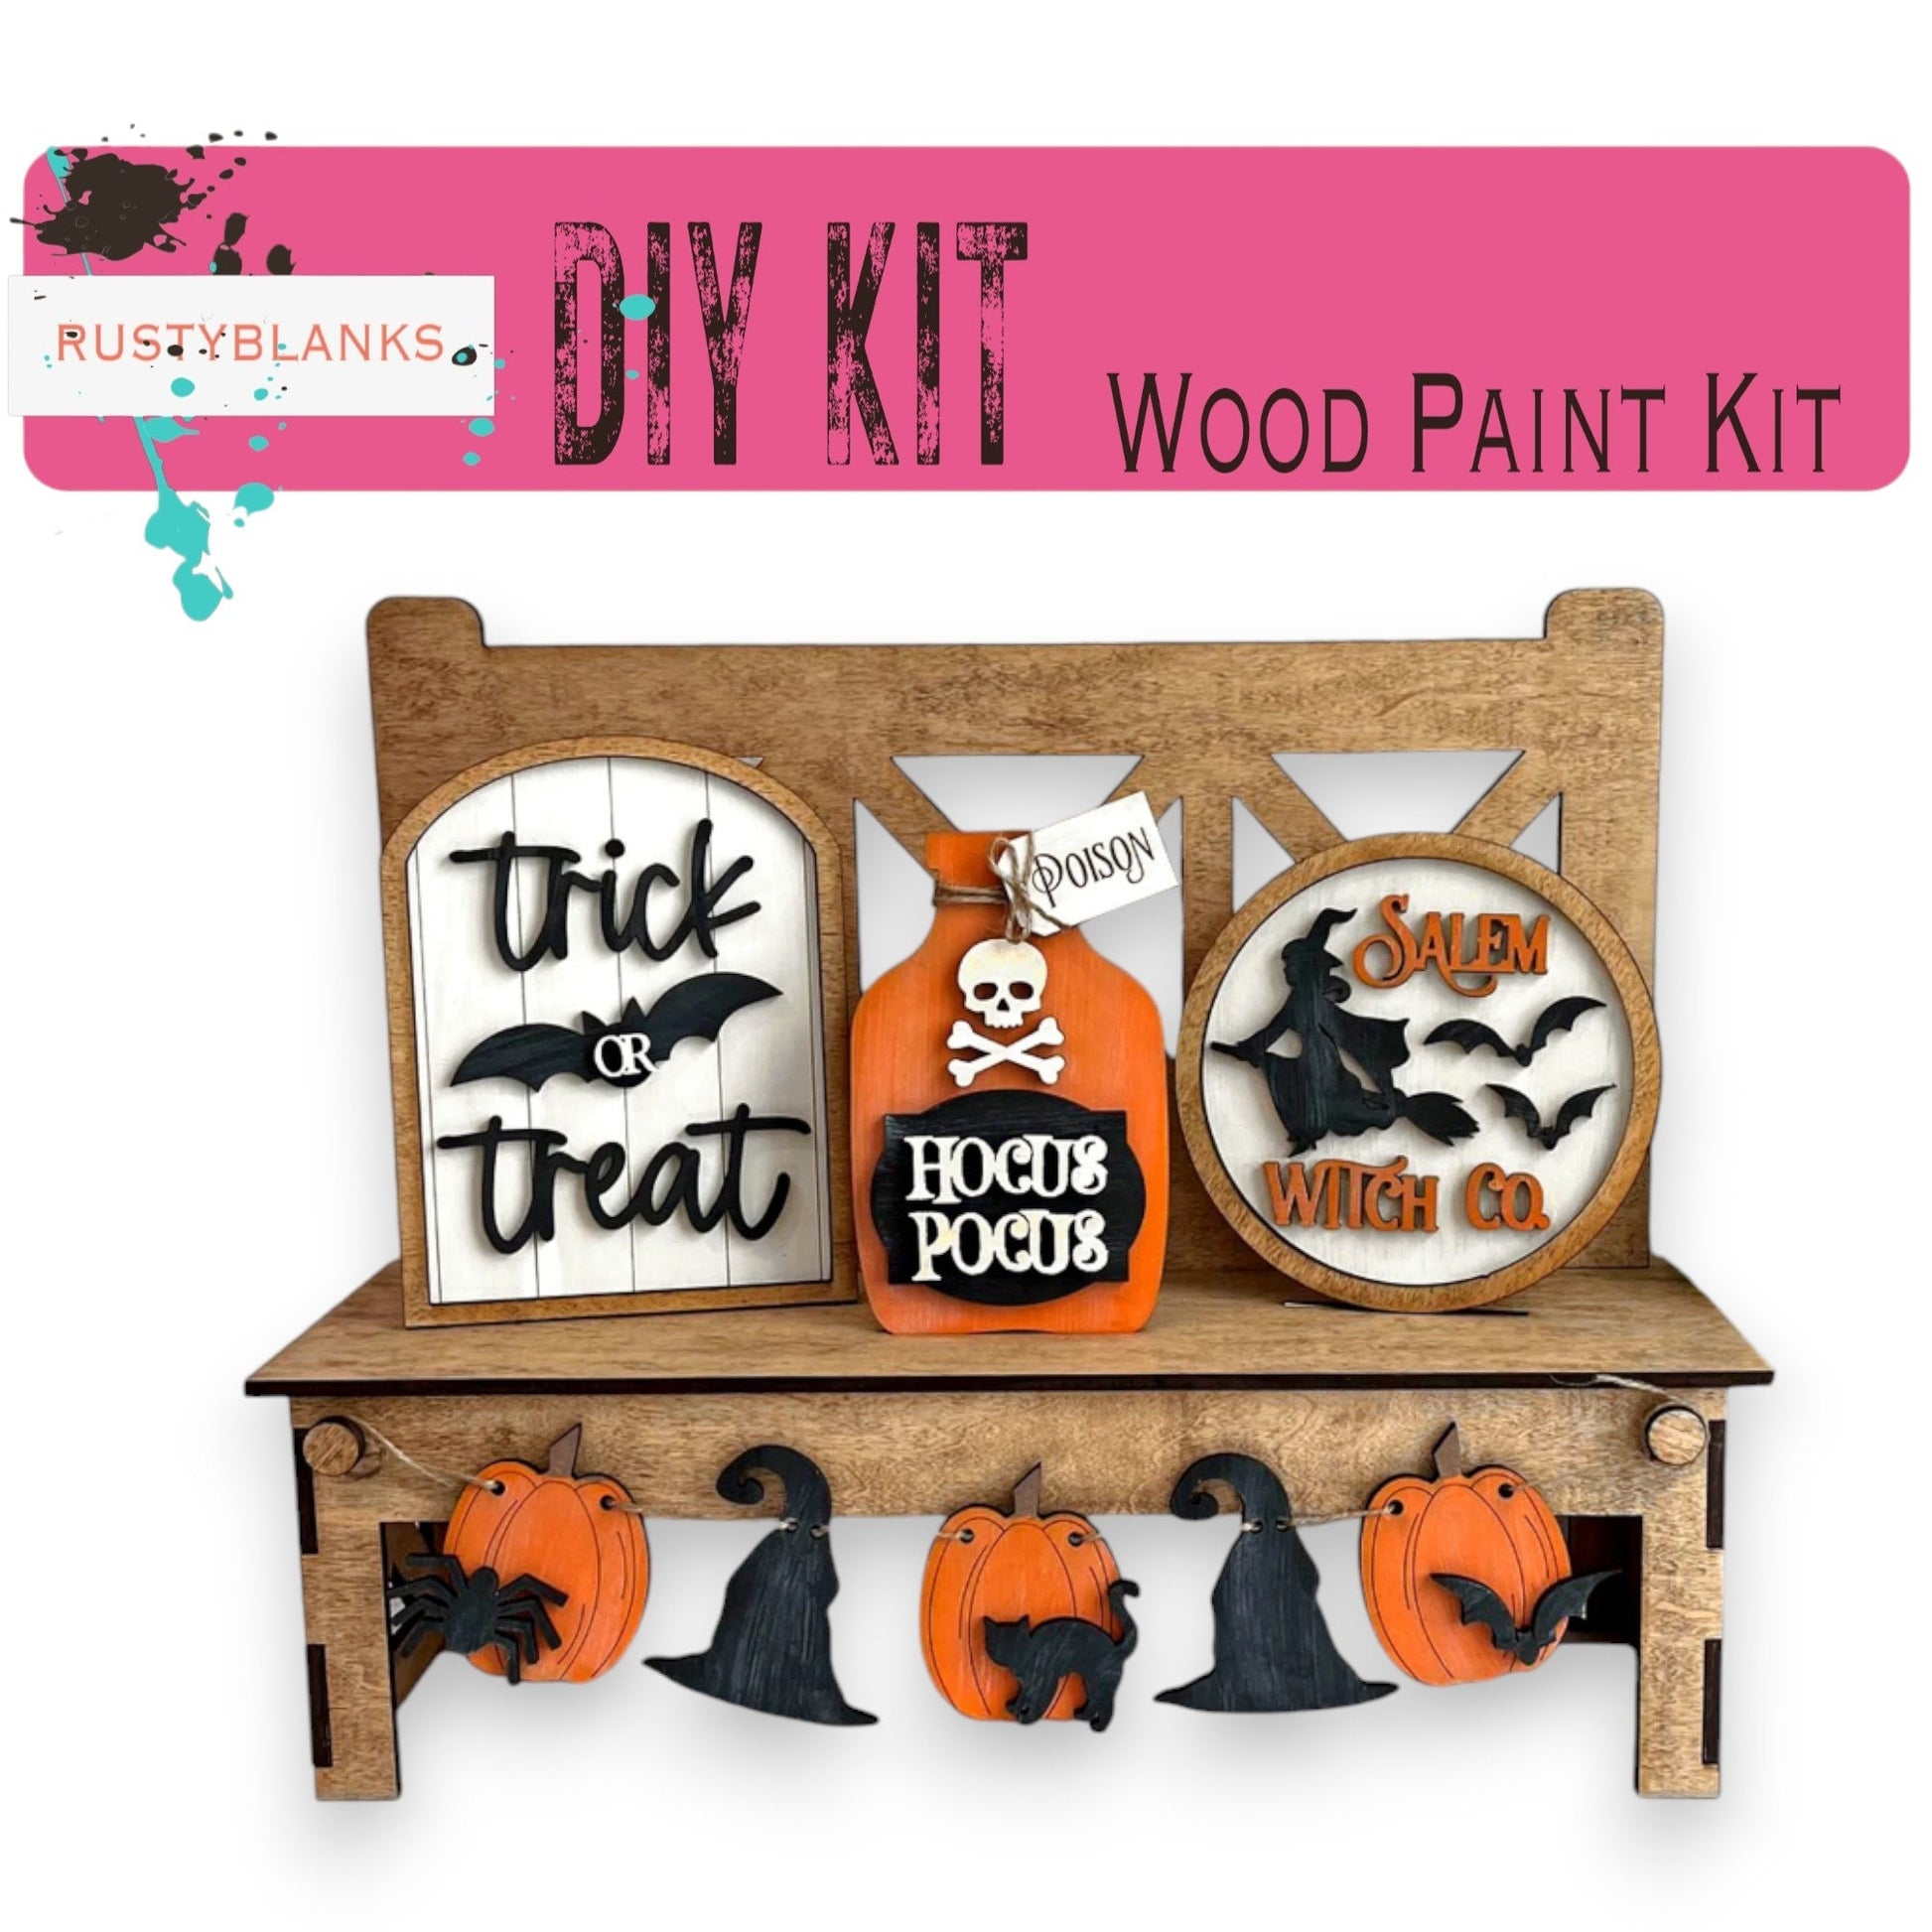 a wooden shelf with halloween decorations on it